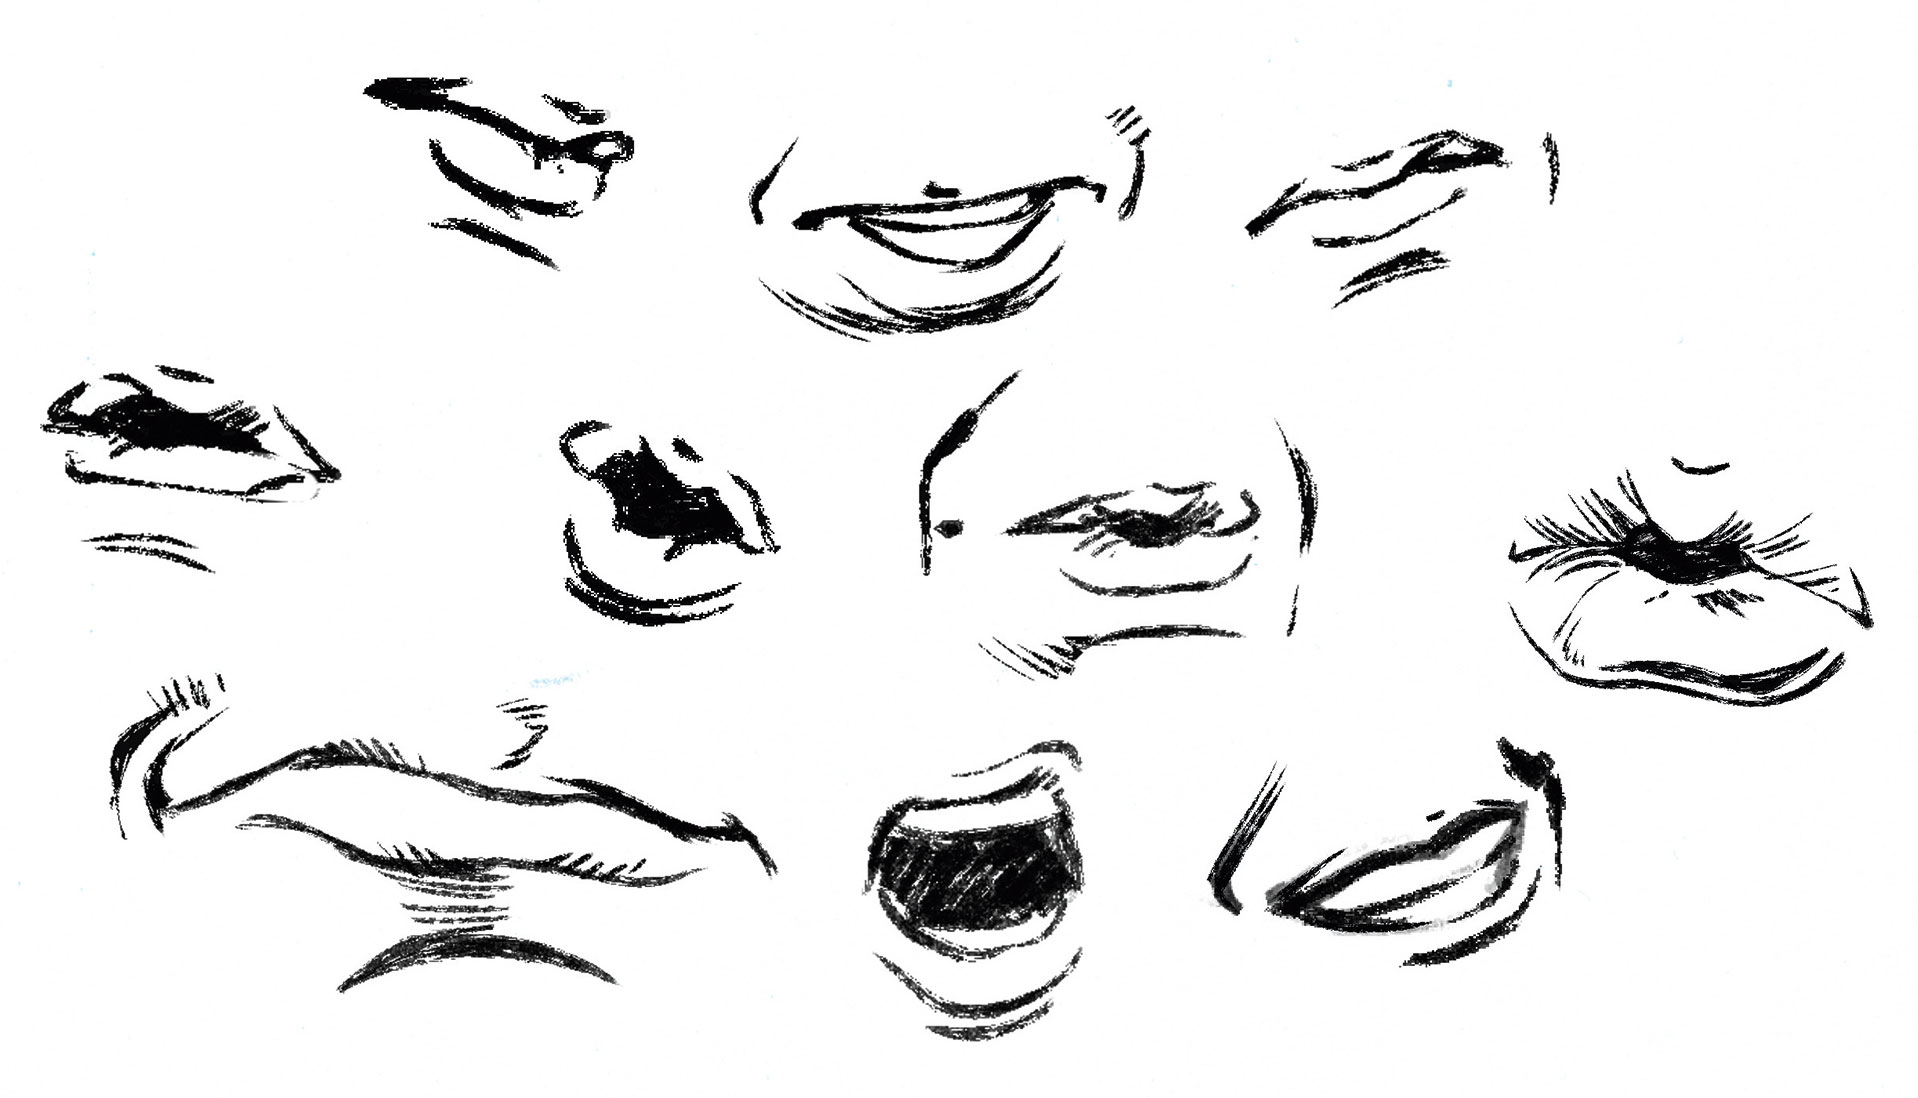 How to draw a face: Several drawings of lips in different expressions